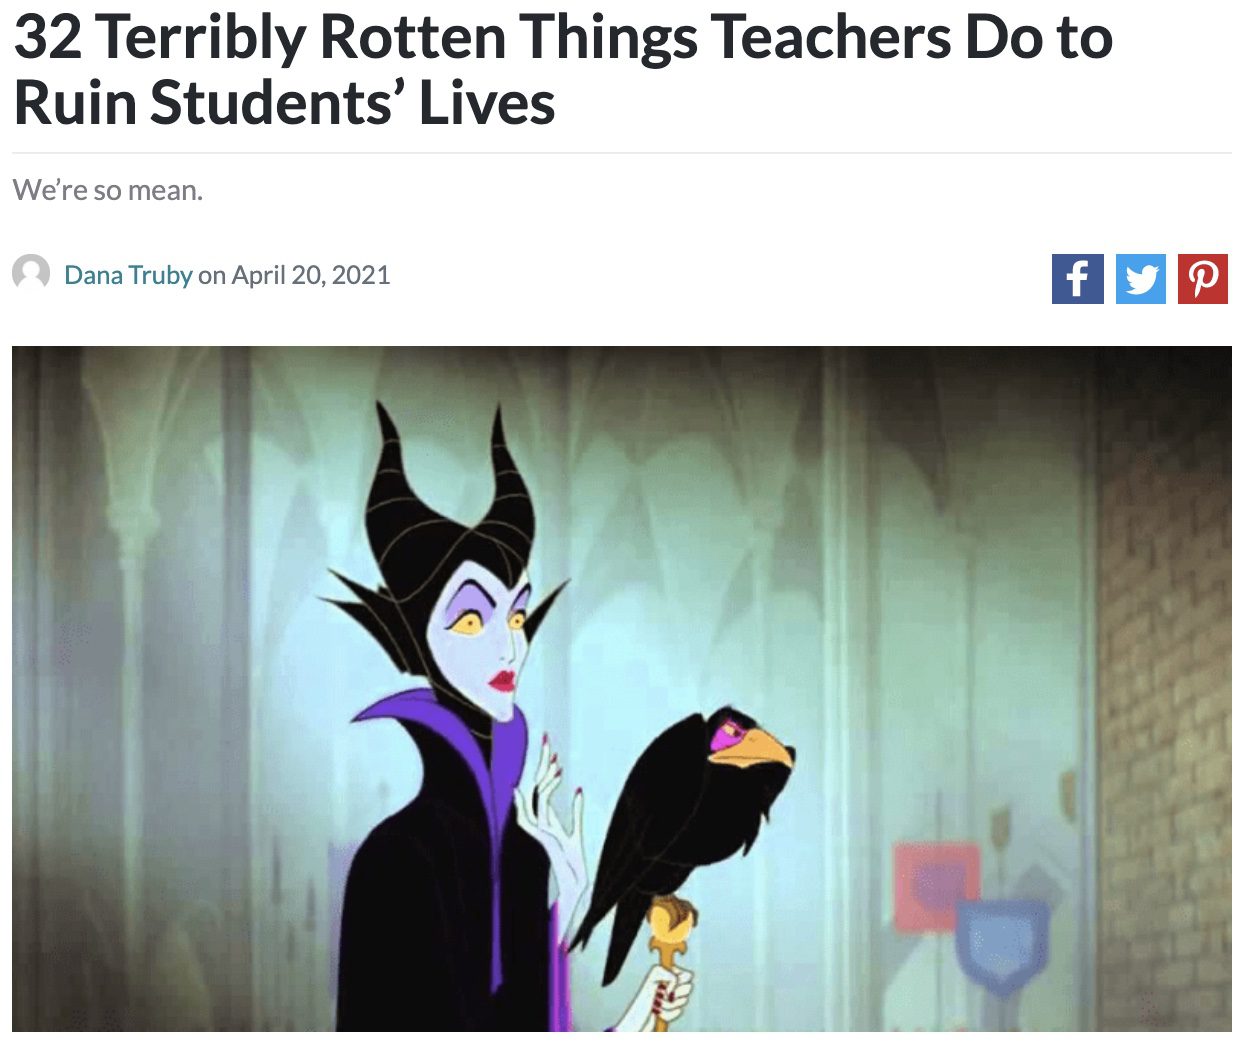 Screencap of an article about 'rotten' things teachers do